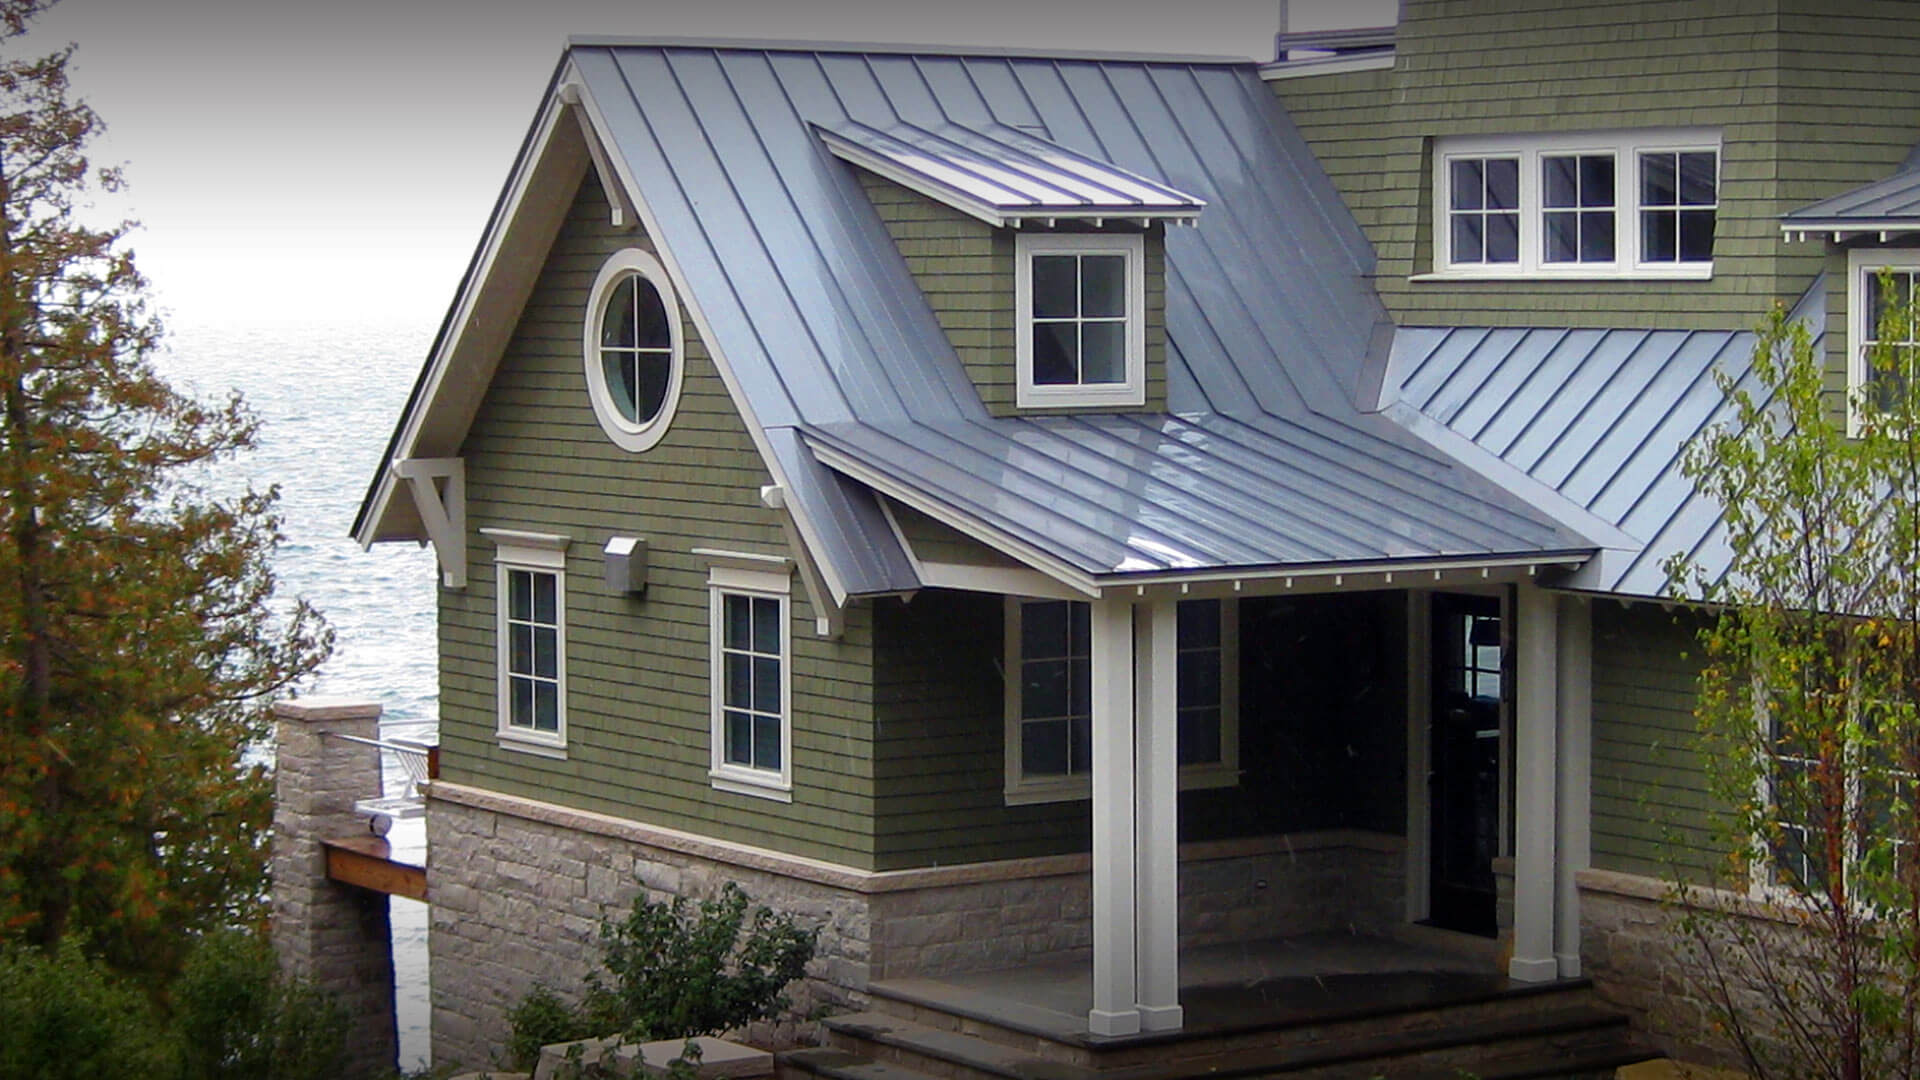 Understanding Different Types Of Roofing and Their Benefits